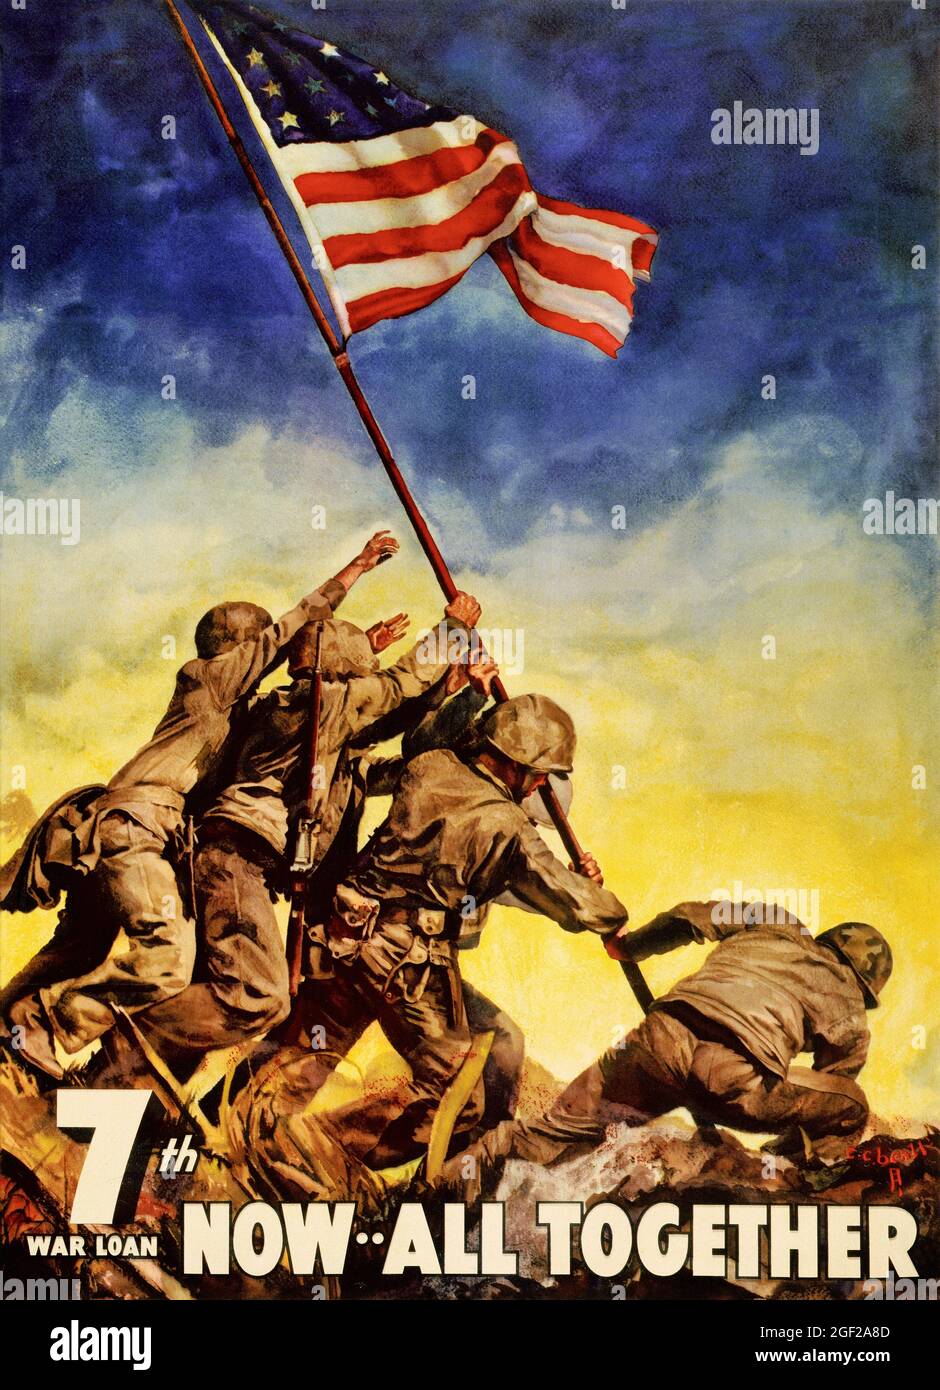 7th war loan. Now... all together by Cecil Calvert Beall (1892-1967). Restored vintage poster published in 1945 in the USA. Stock Photo